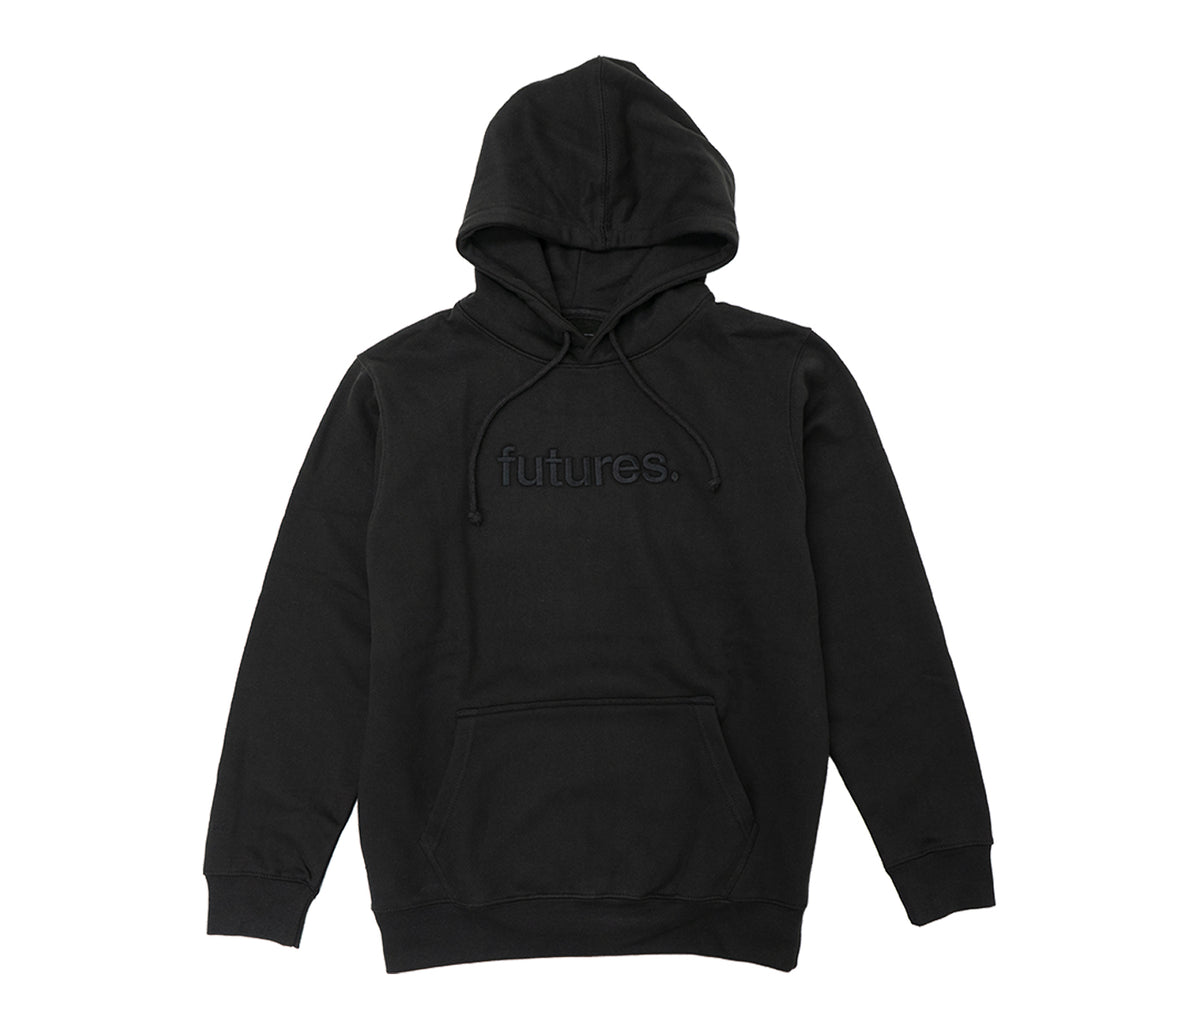 Futures Embroidered Hoodie – Futures Fins US